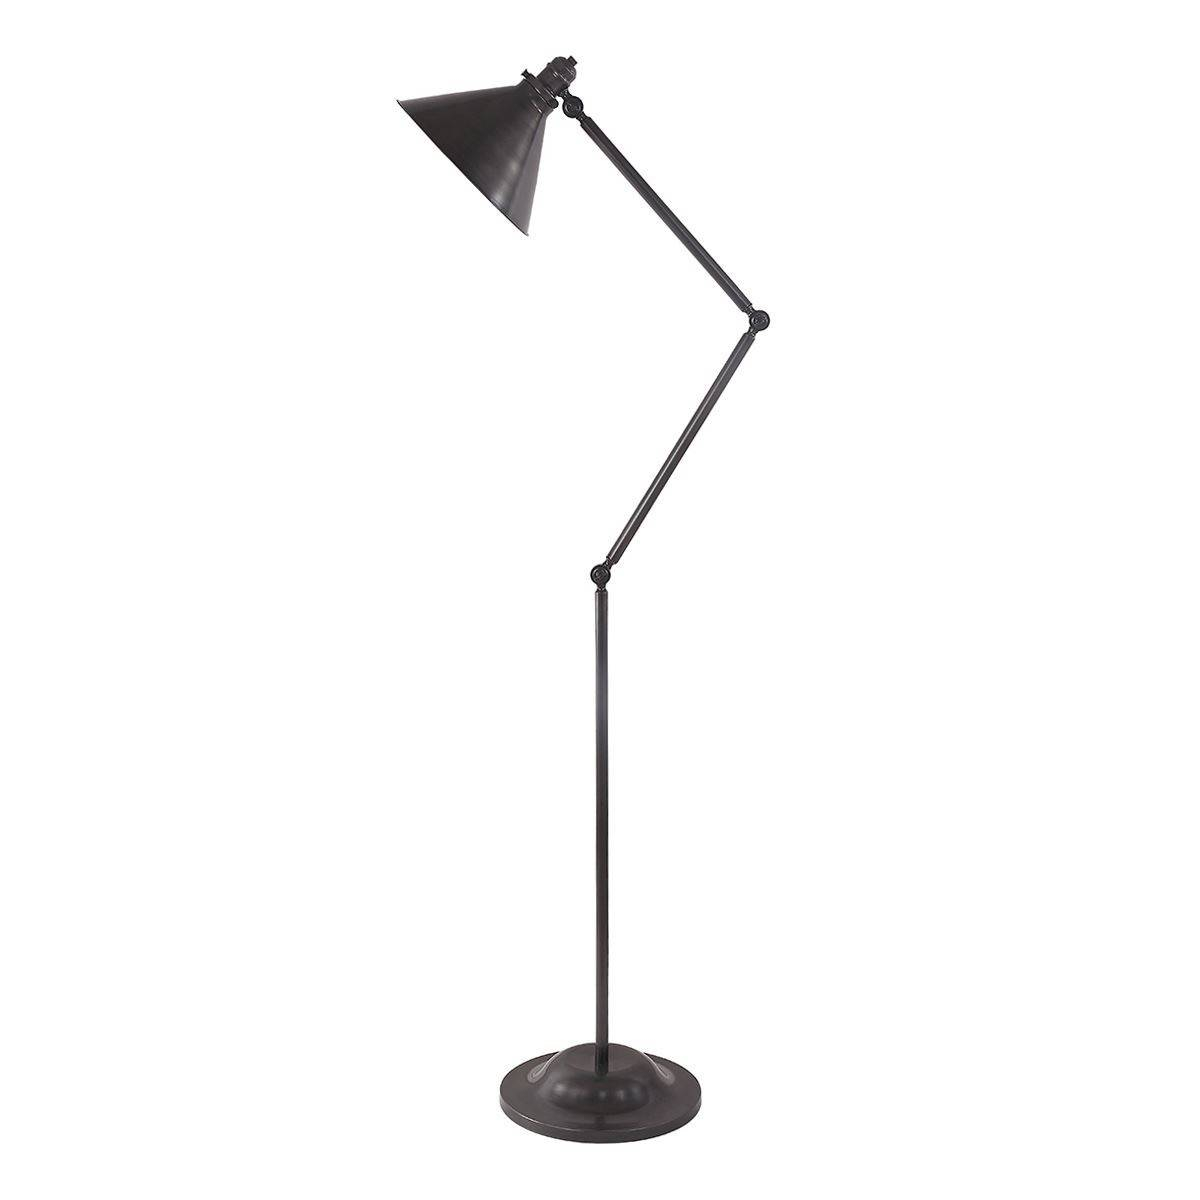 Awesome Bronze Floor Lamp Architectures Lighting Excellent in dimensions 1200 X 1200